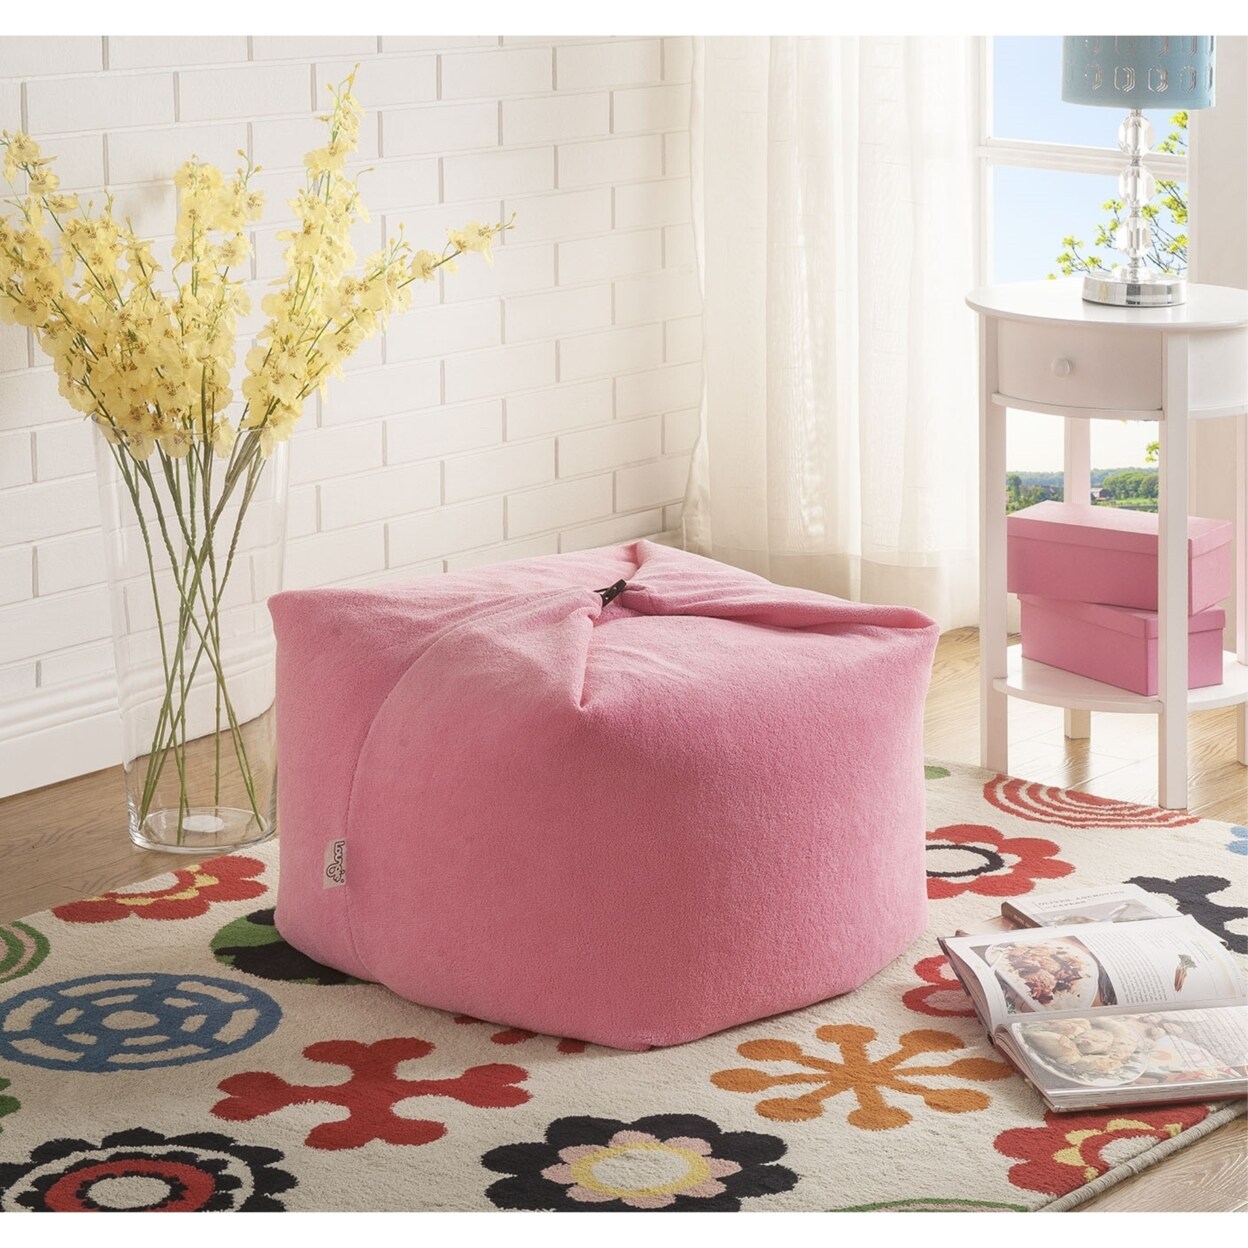 Loungie   Magic Pouf Beanbag-Microplush Fabric-3-in-1 Convertible Ottoman + Chair + Floor Pillow-Modern and Functional